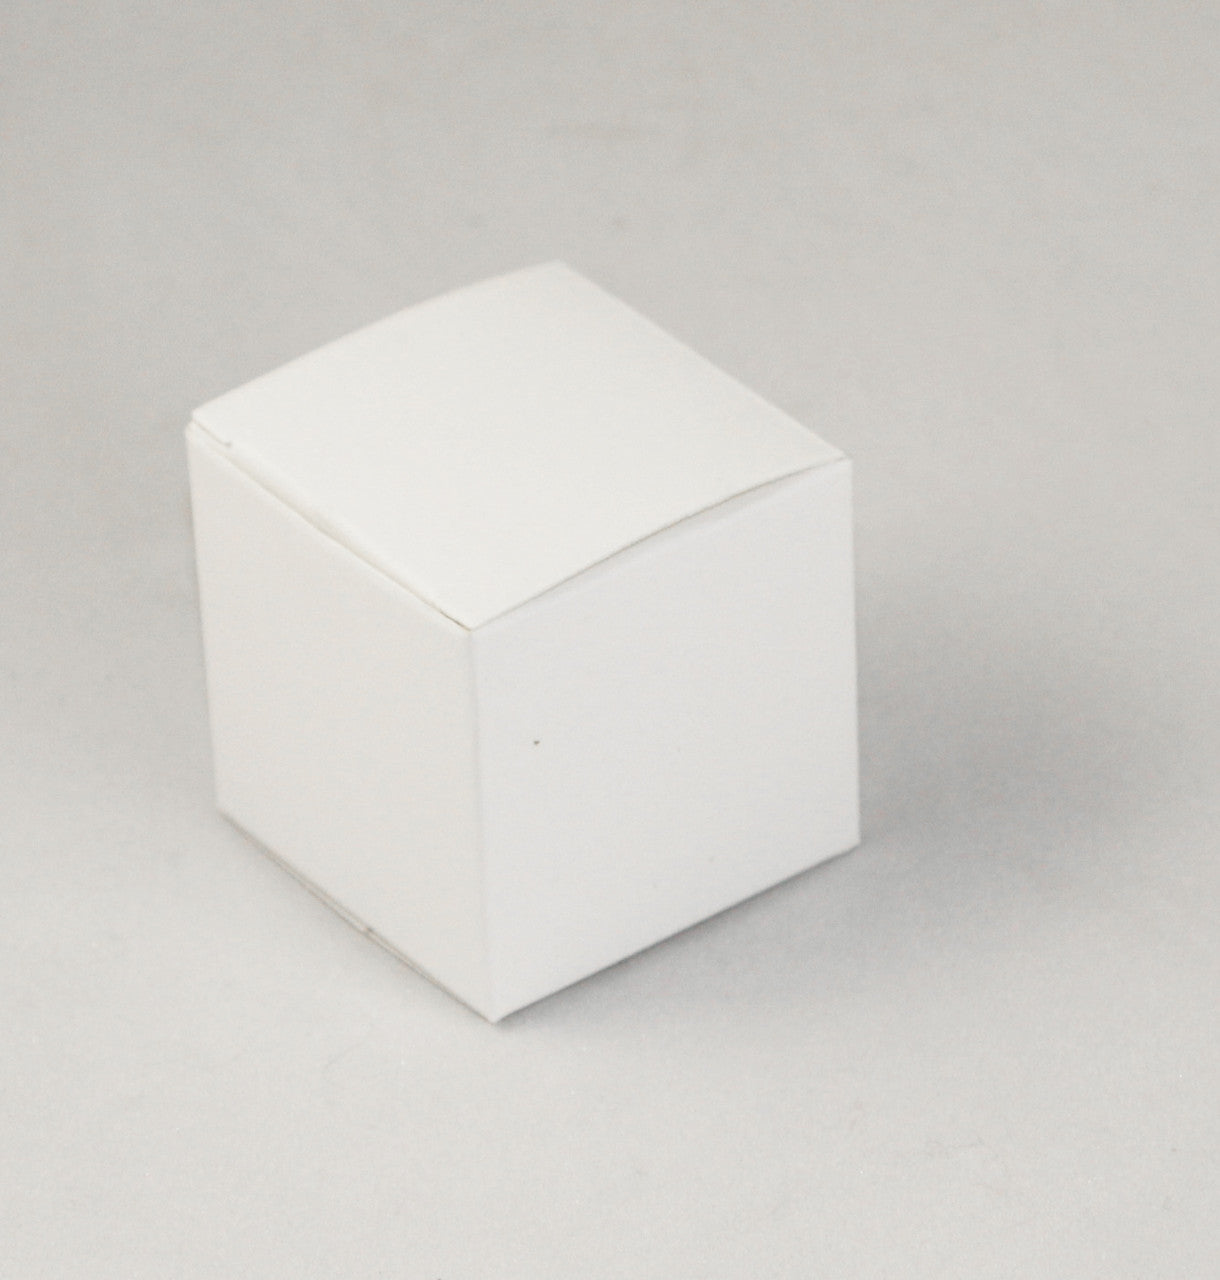 10 Pack of White 5x5x8cm Square C10-Pack White 5x5x8cm Square Cube Card Gift Box - Wedding, Jewelry, Party Favorube Card Gift Box - Folding Packaging Small rectangle/square Boxes for Wedding Jewelry Gift Party Favor Model Candy Chocolate Soap Box | Auzzi Store